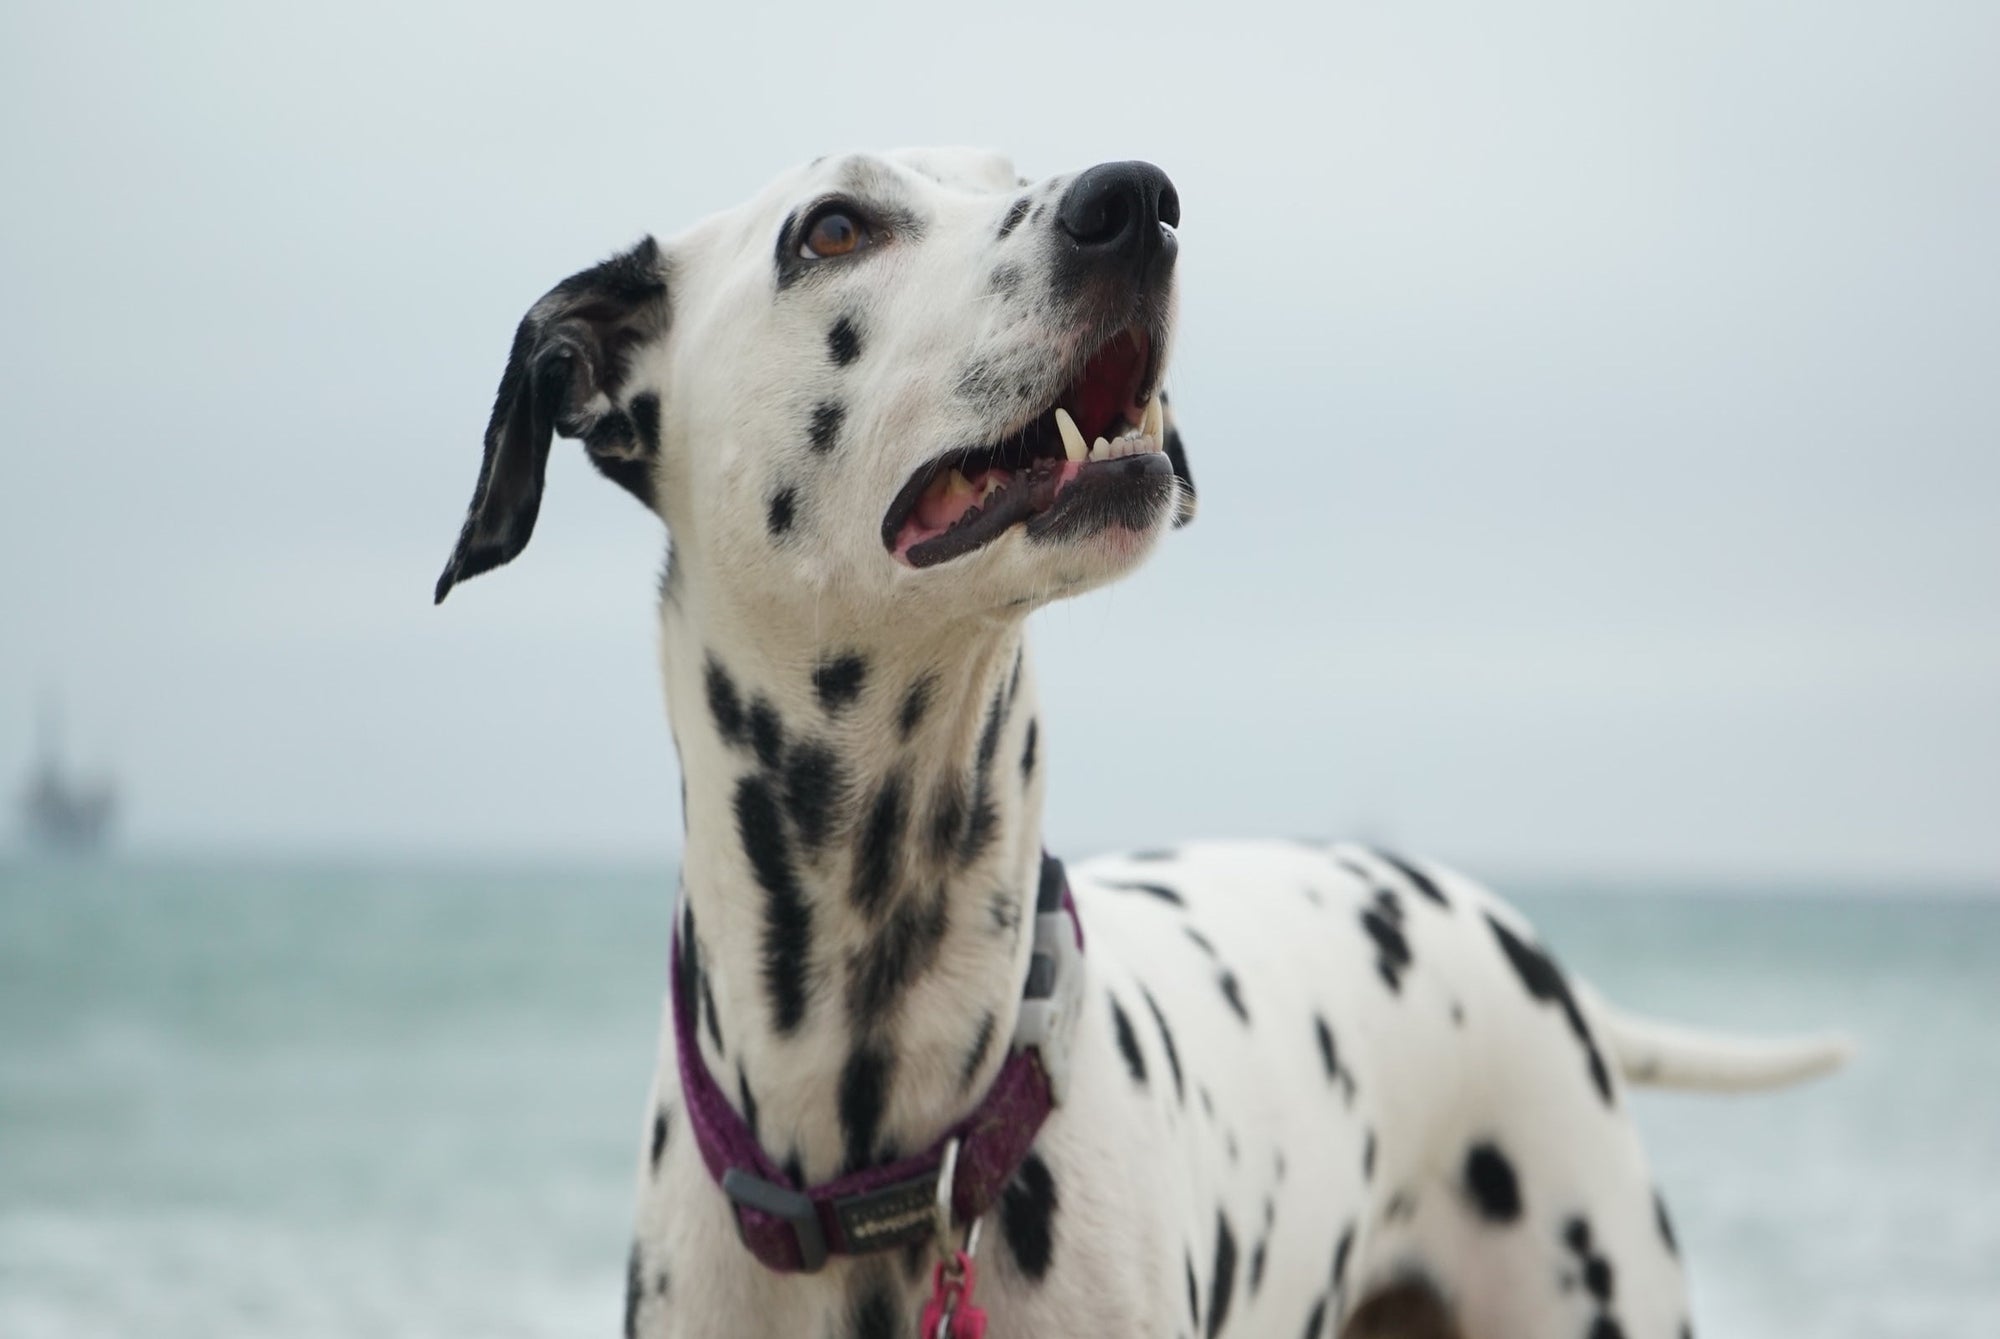 dalmatian-dog-on-the-beach-getting-ready-to-go-running